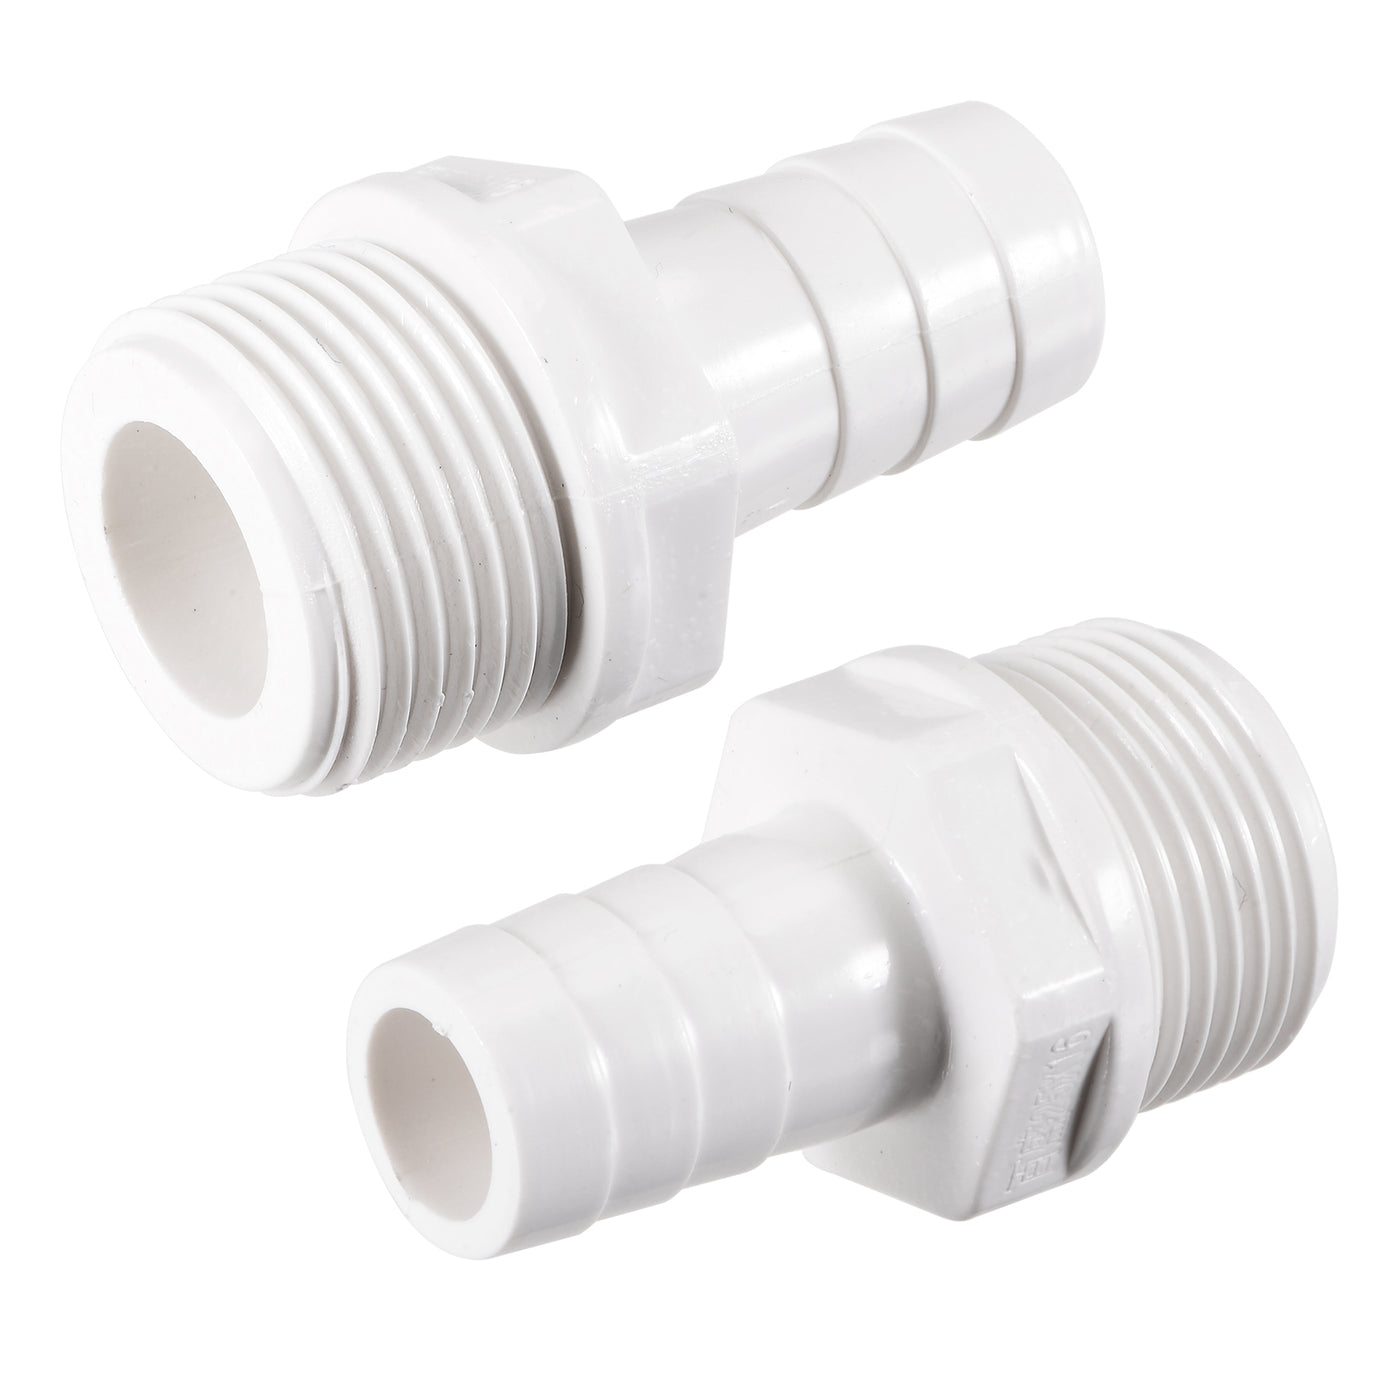 uxcell Uxcell PVC Tube Fitting Adapter 16mm Barbed x G3/4 Male White for Aquariums, Water Tanks, Tubs, Pools 2Pcs